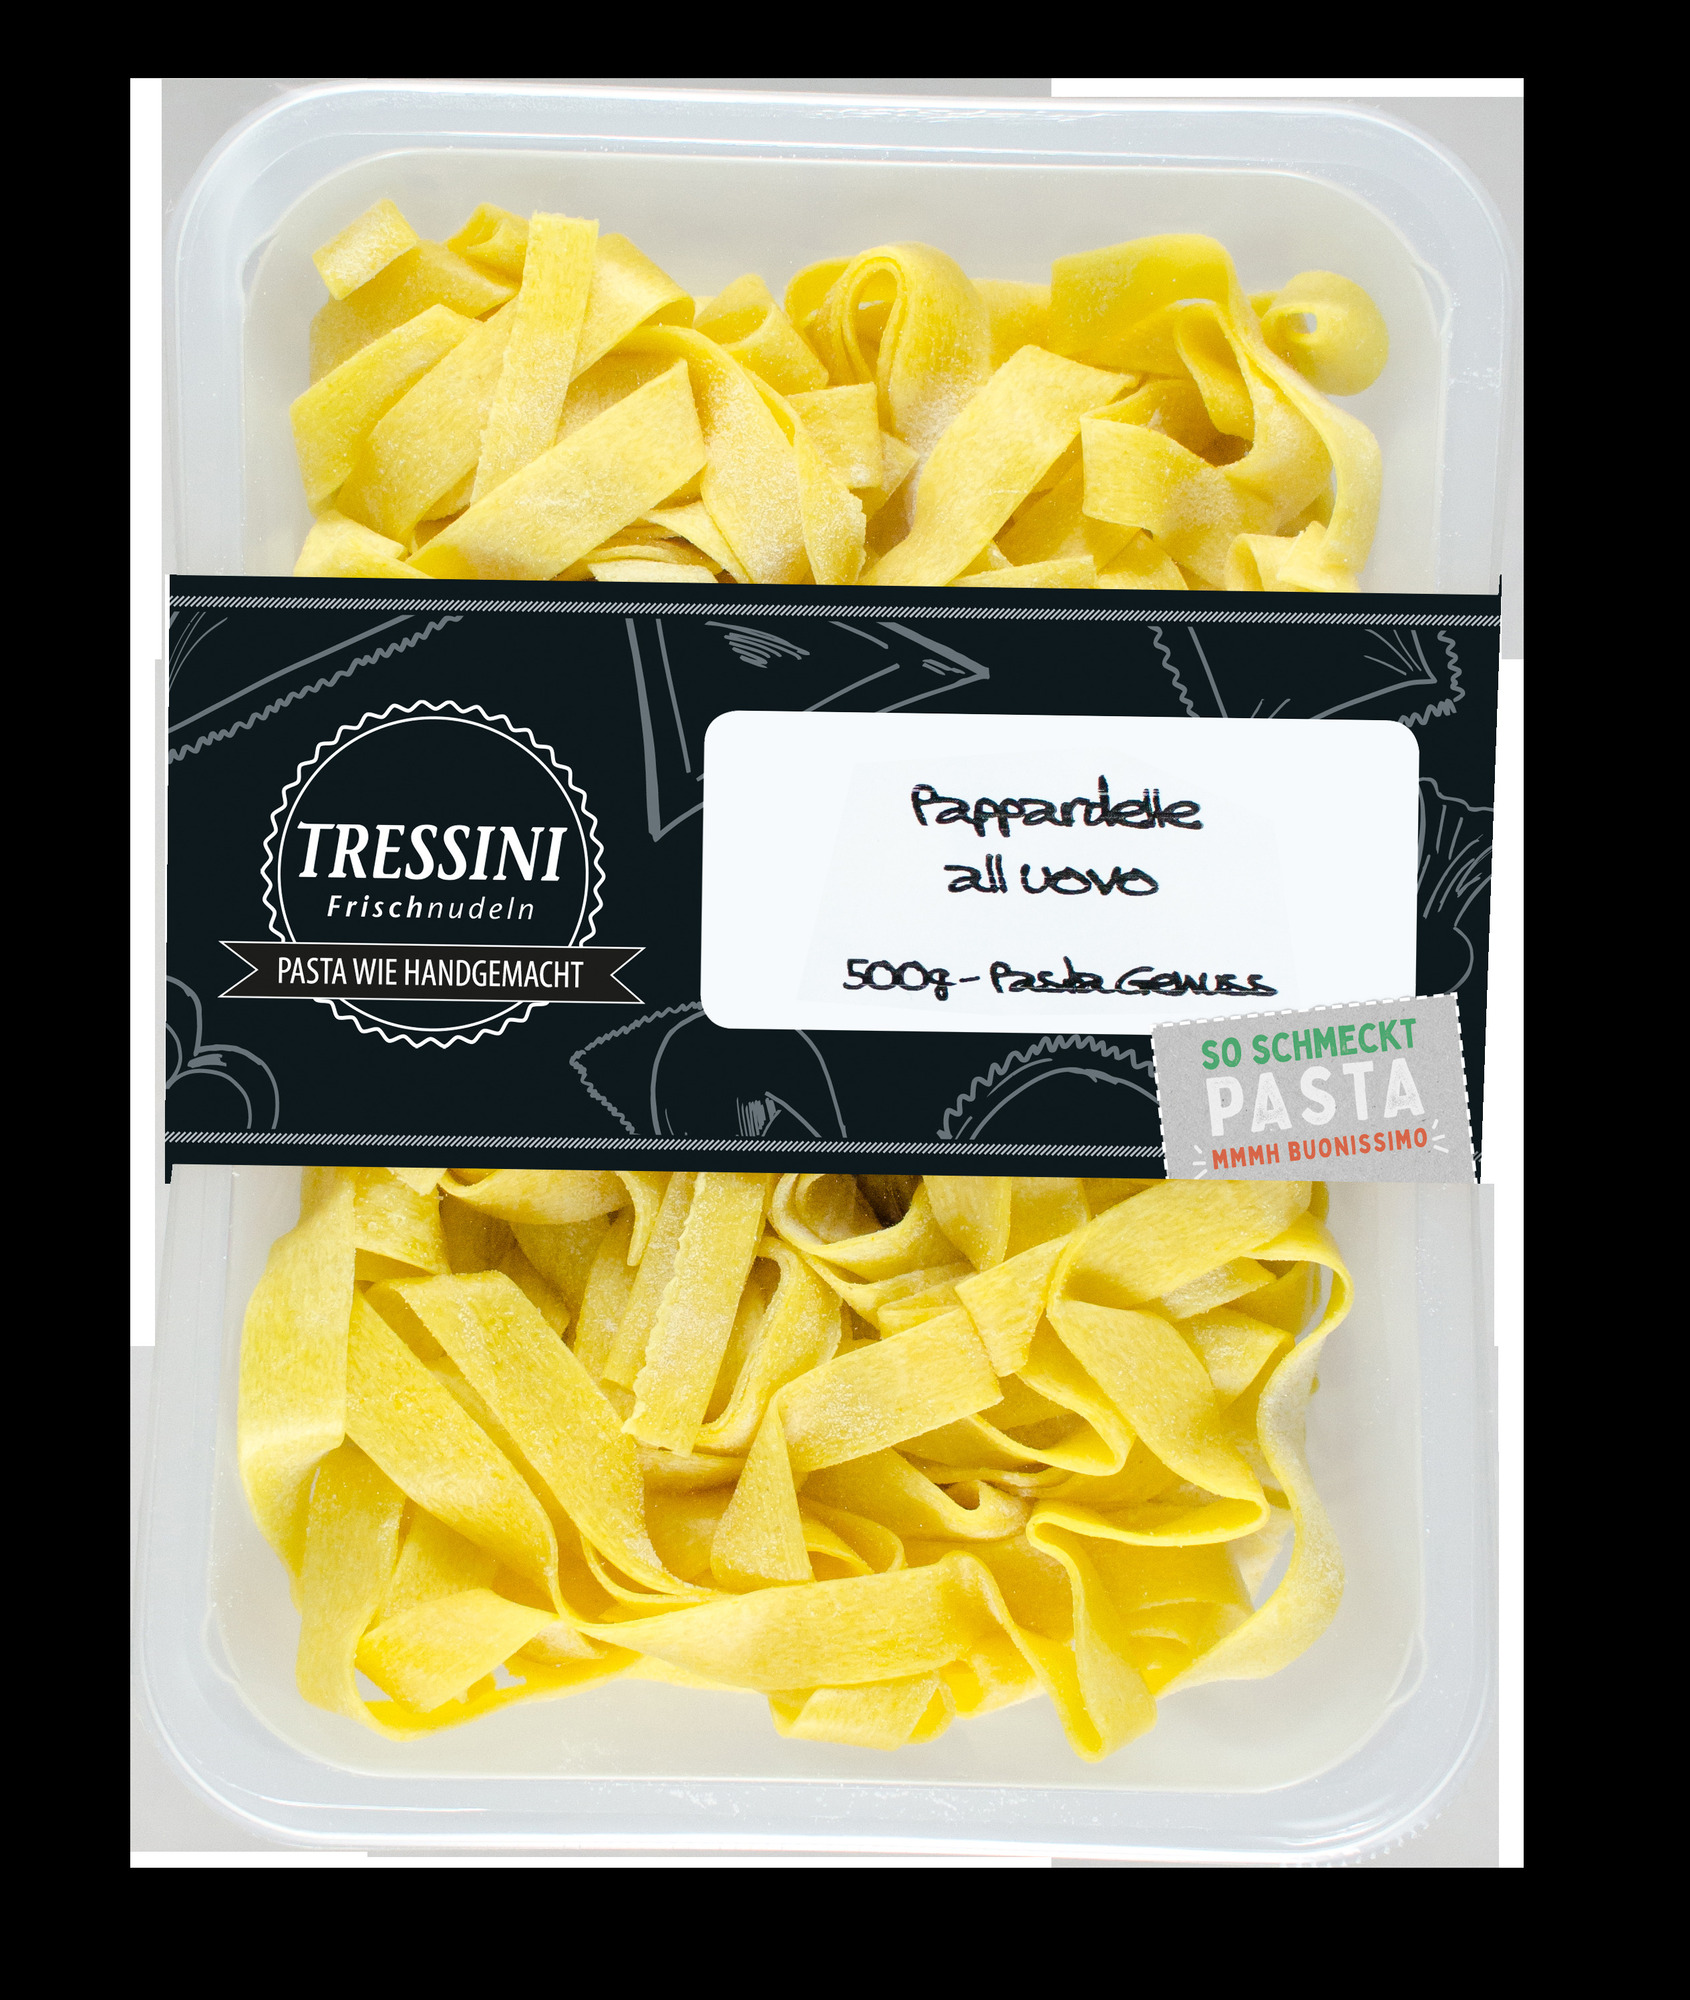 Papardelle all uovo 500g